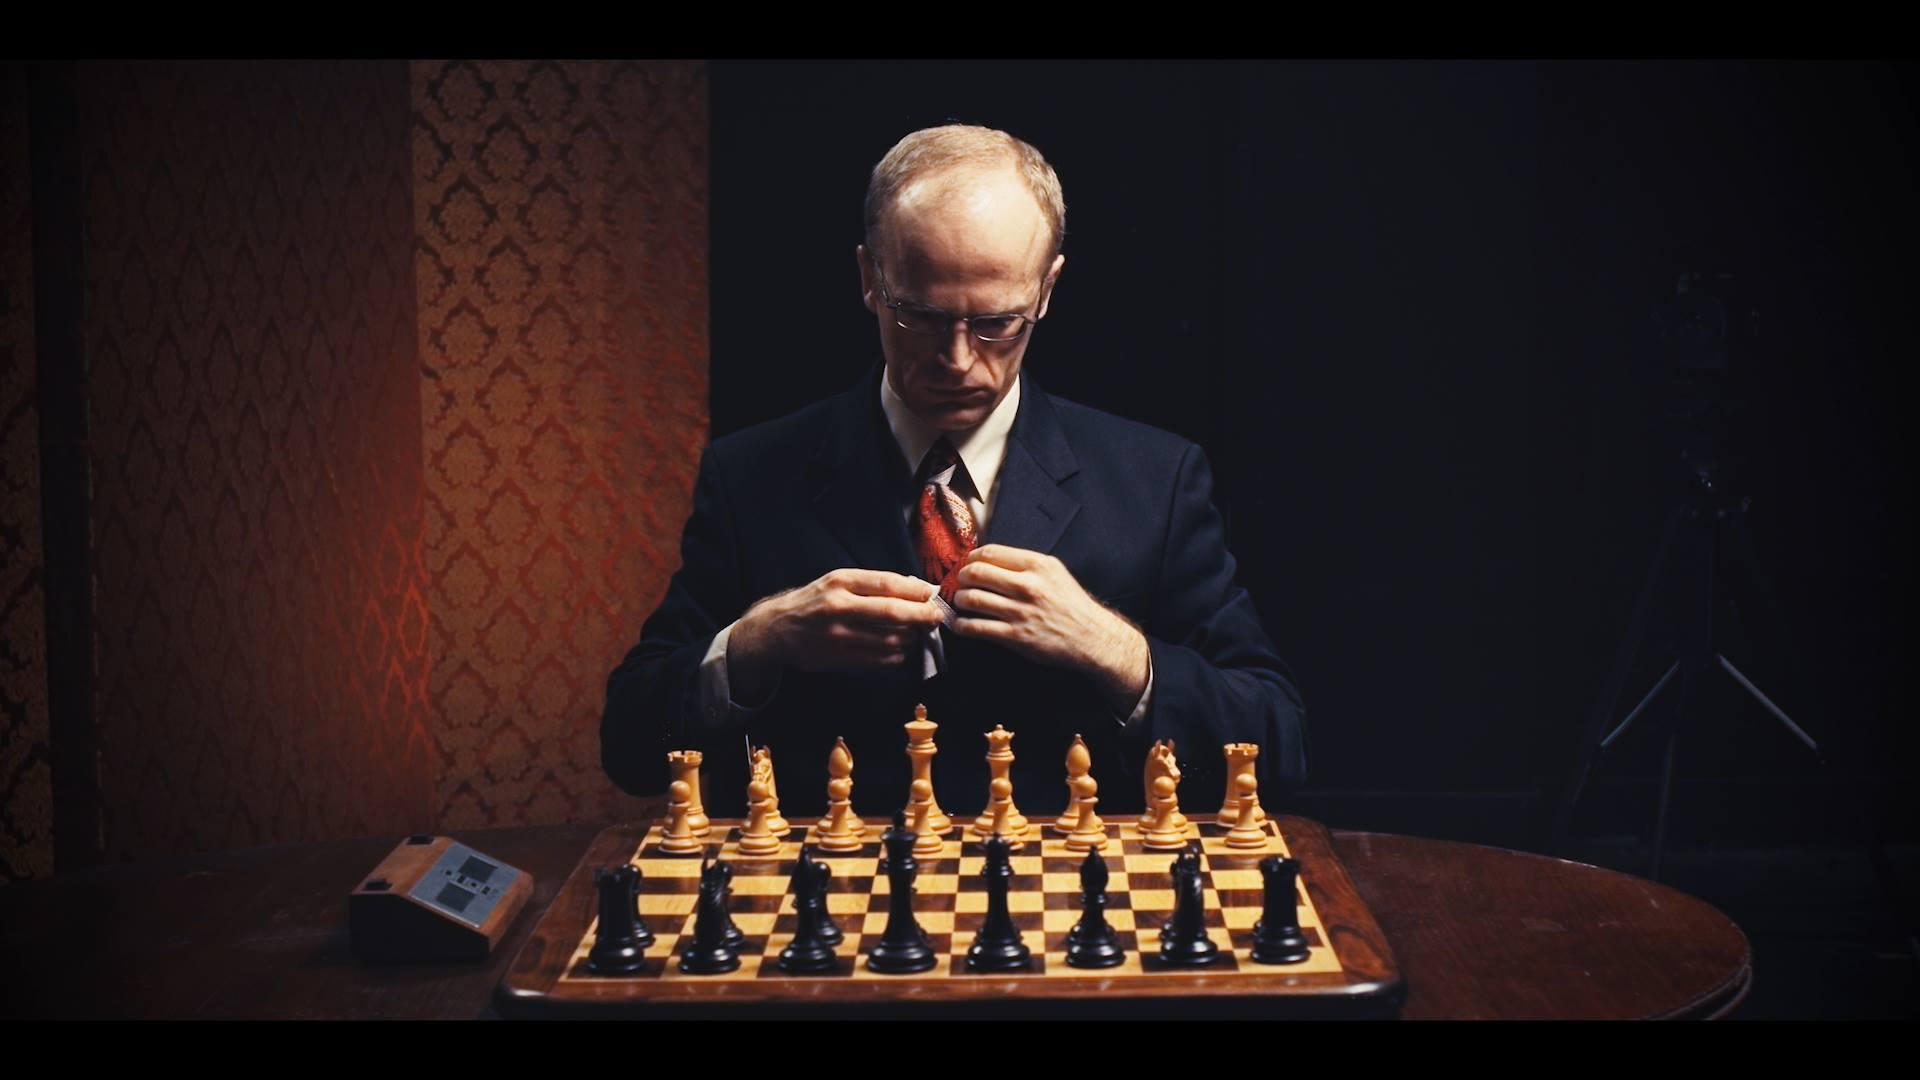 Yet Another "Chess" Film? 